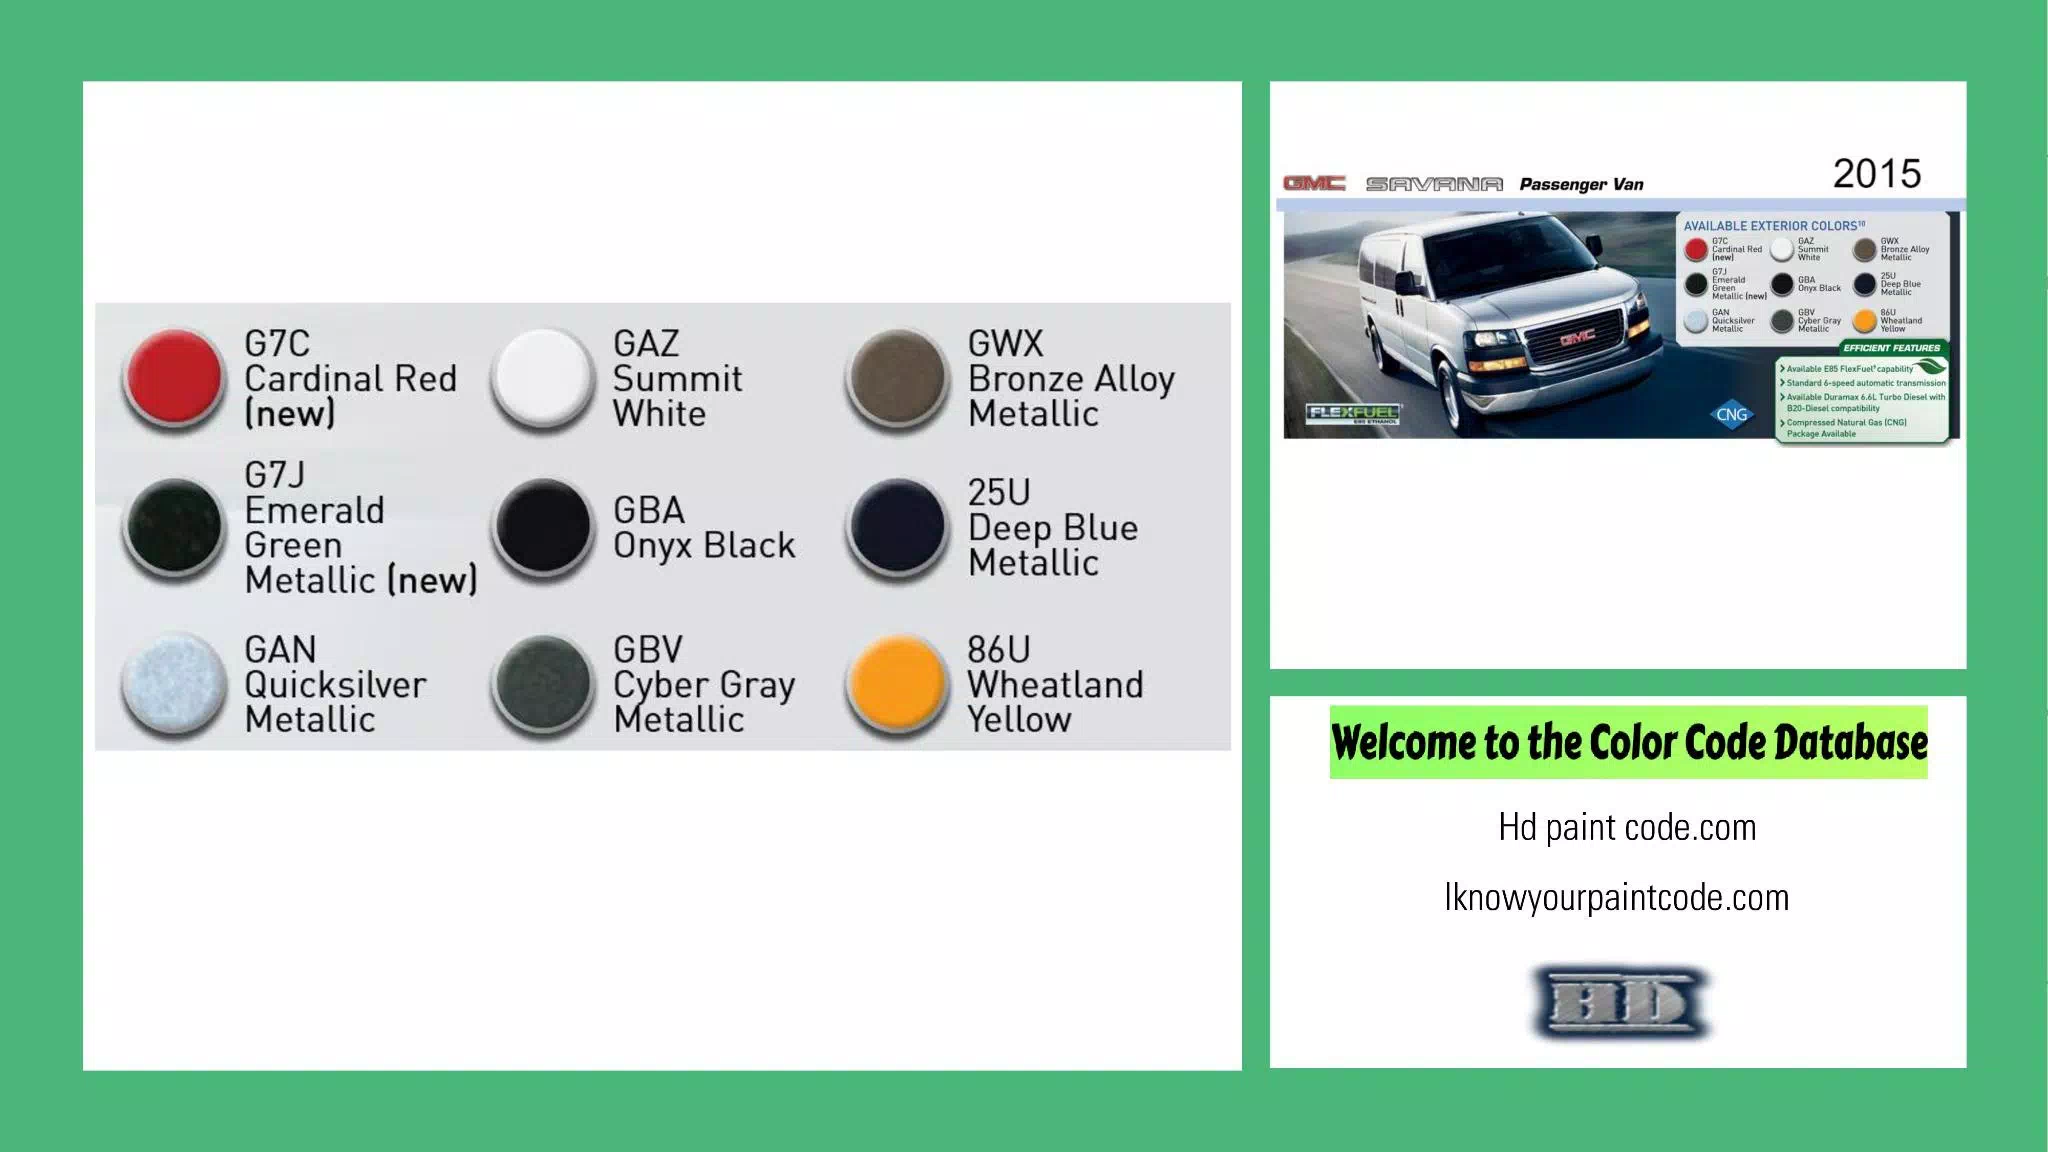 exterior colors and chips for the 2015 gmc savana vehicle